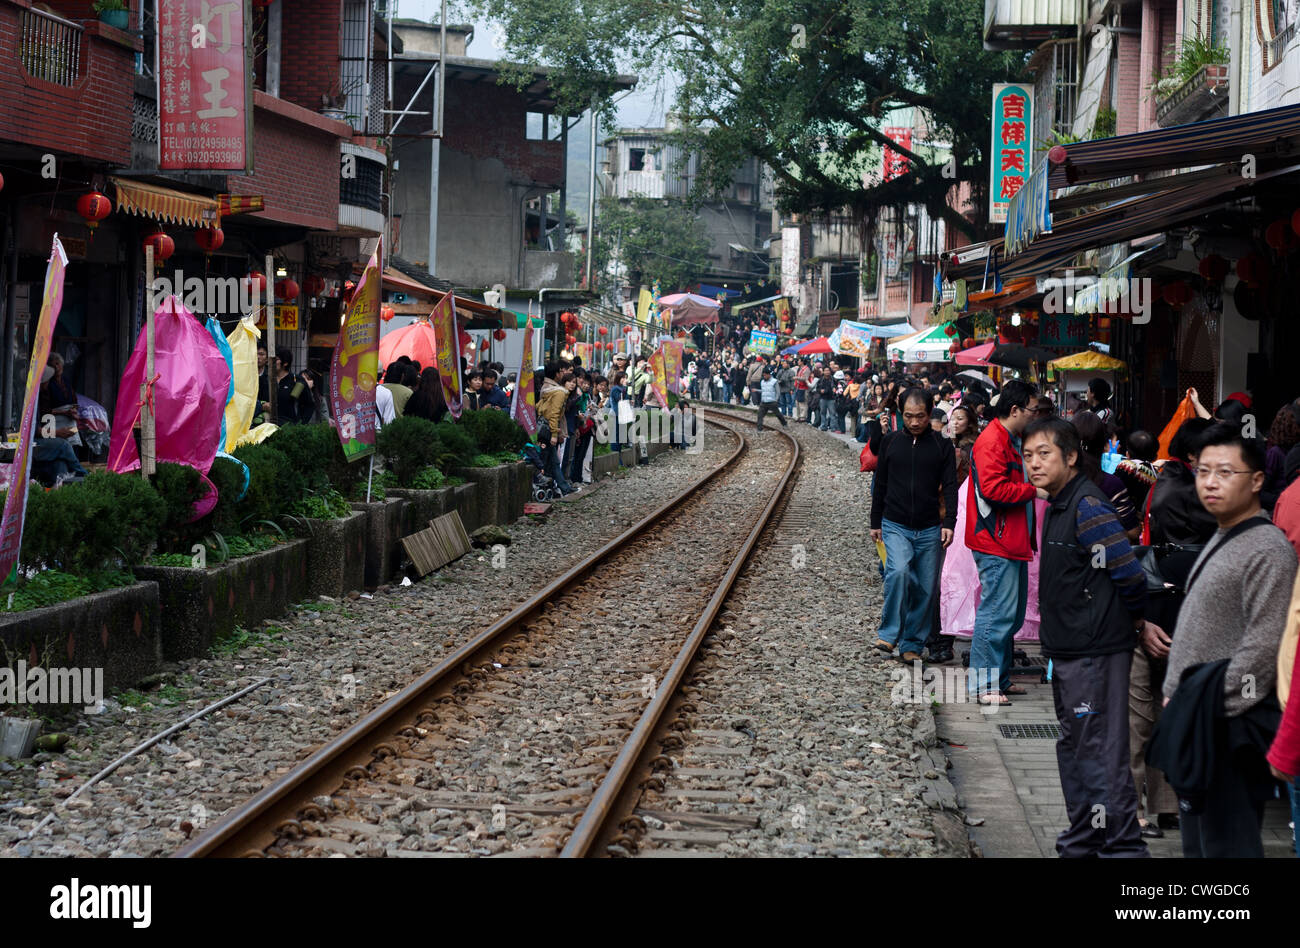 Looking down the track at the Pingxi train line during the lantern festival when crowds flock to the little town, Taiwan. Stock Photo